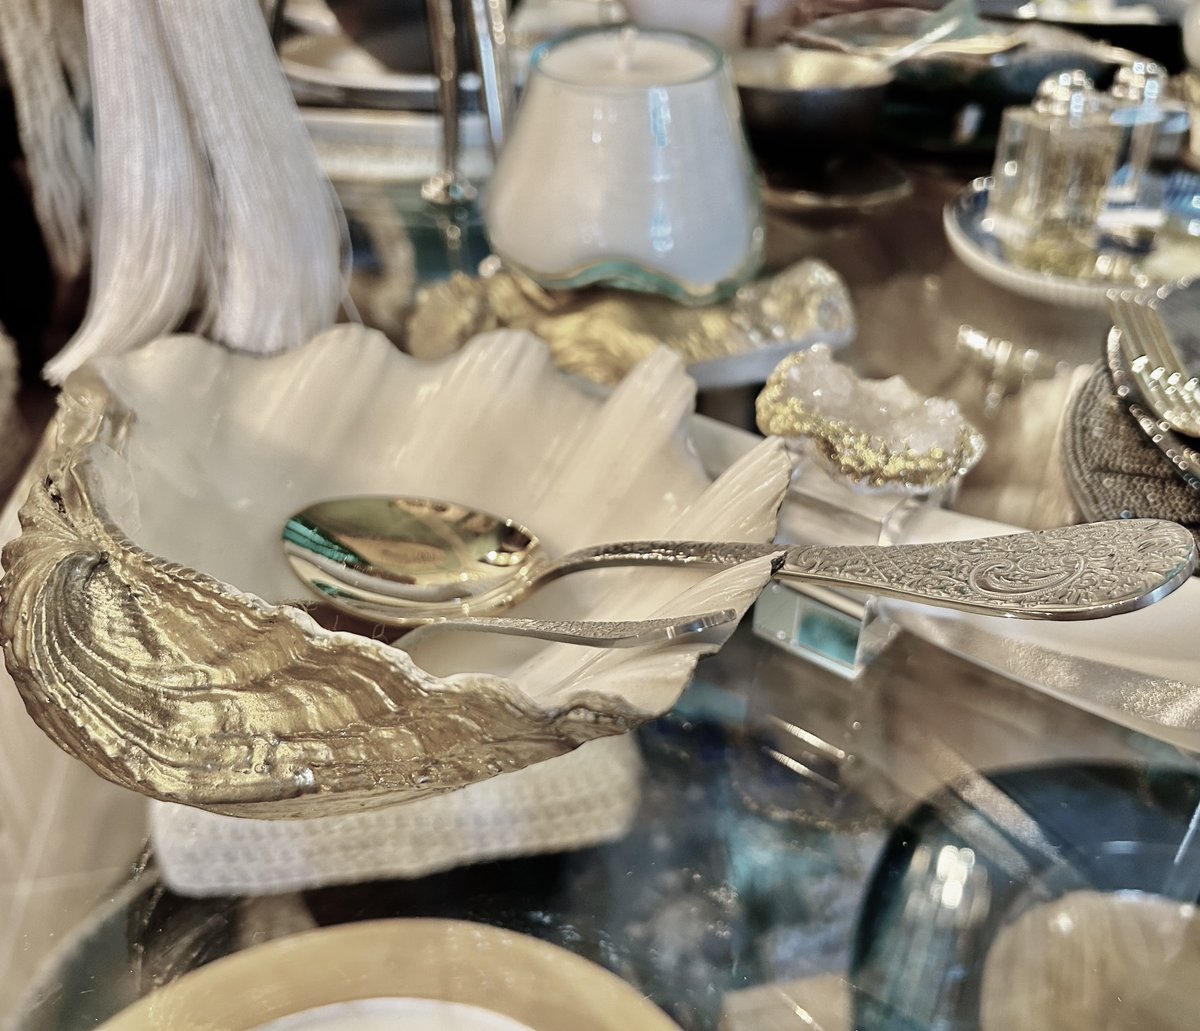 Natural bowl clams in golden color
Dining  is a delightful and beautiful experience ...welcome...
please seat yourself...
to eat with us is the ART of an elegant and exclusive pleasure.
#art #luxury #design #luxuryliving #decor #mykonosdesign 
art-luxurydesign.com